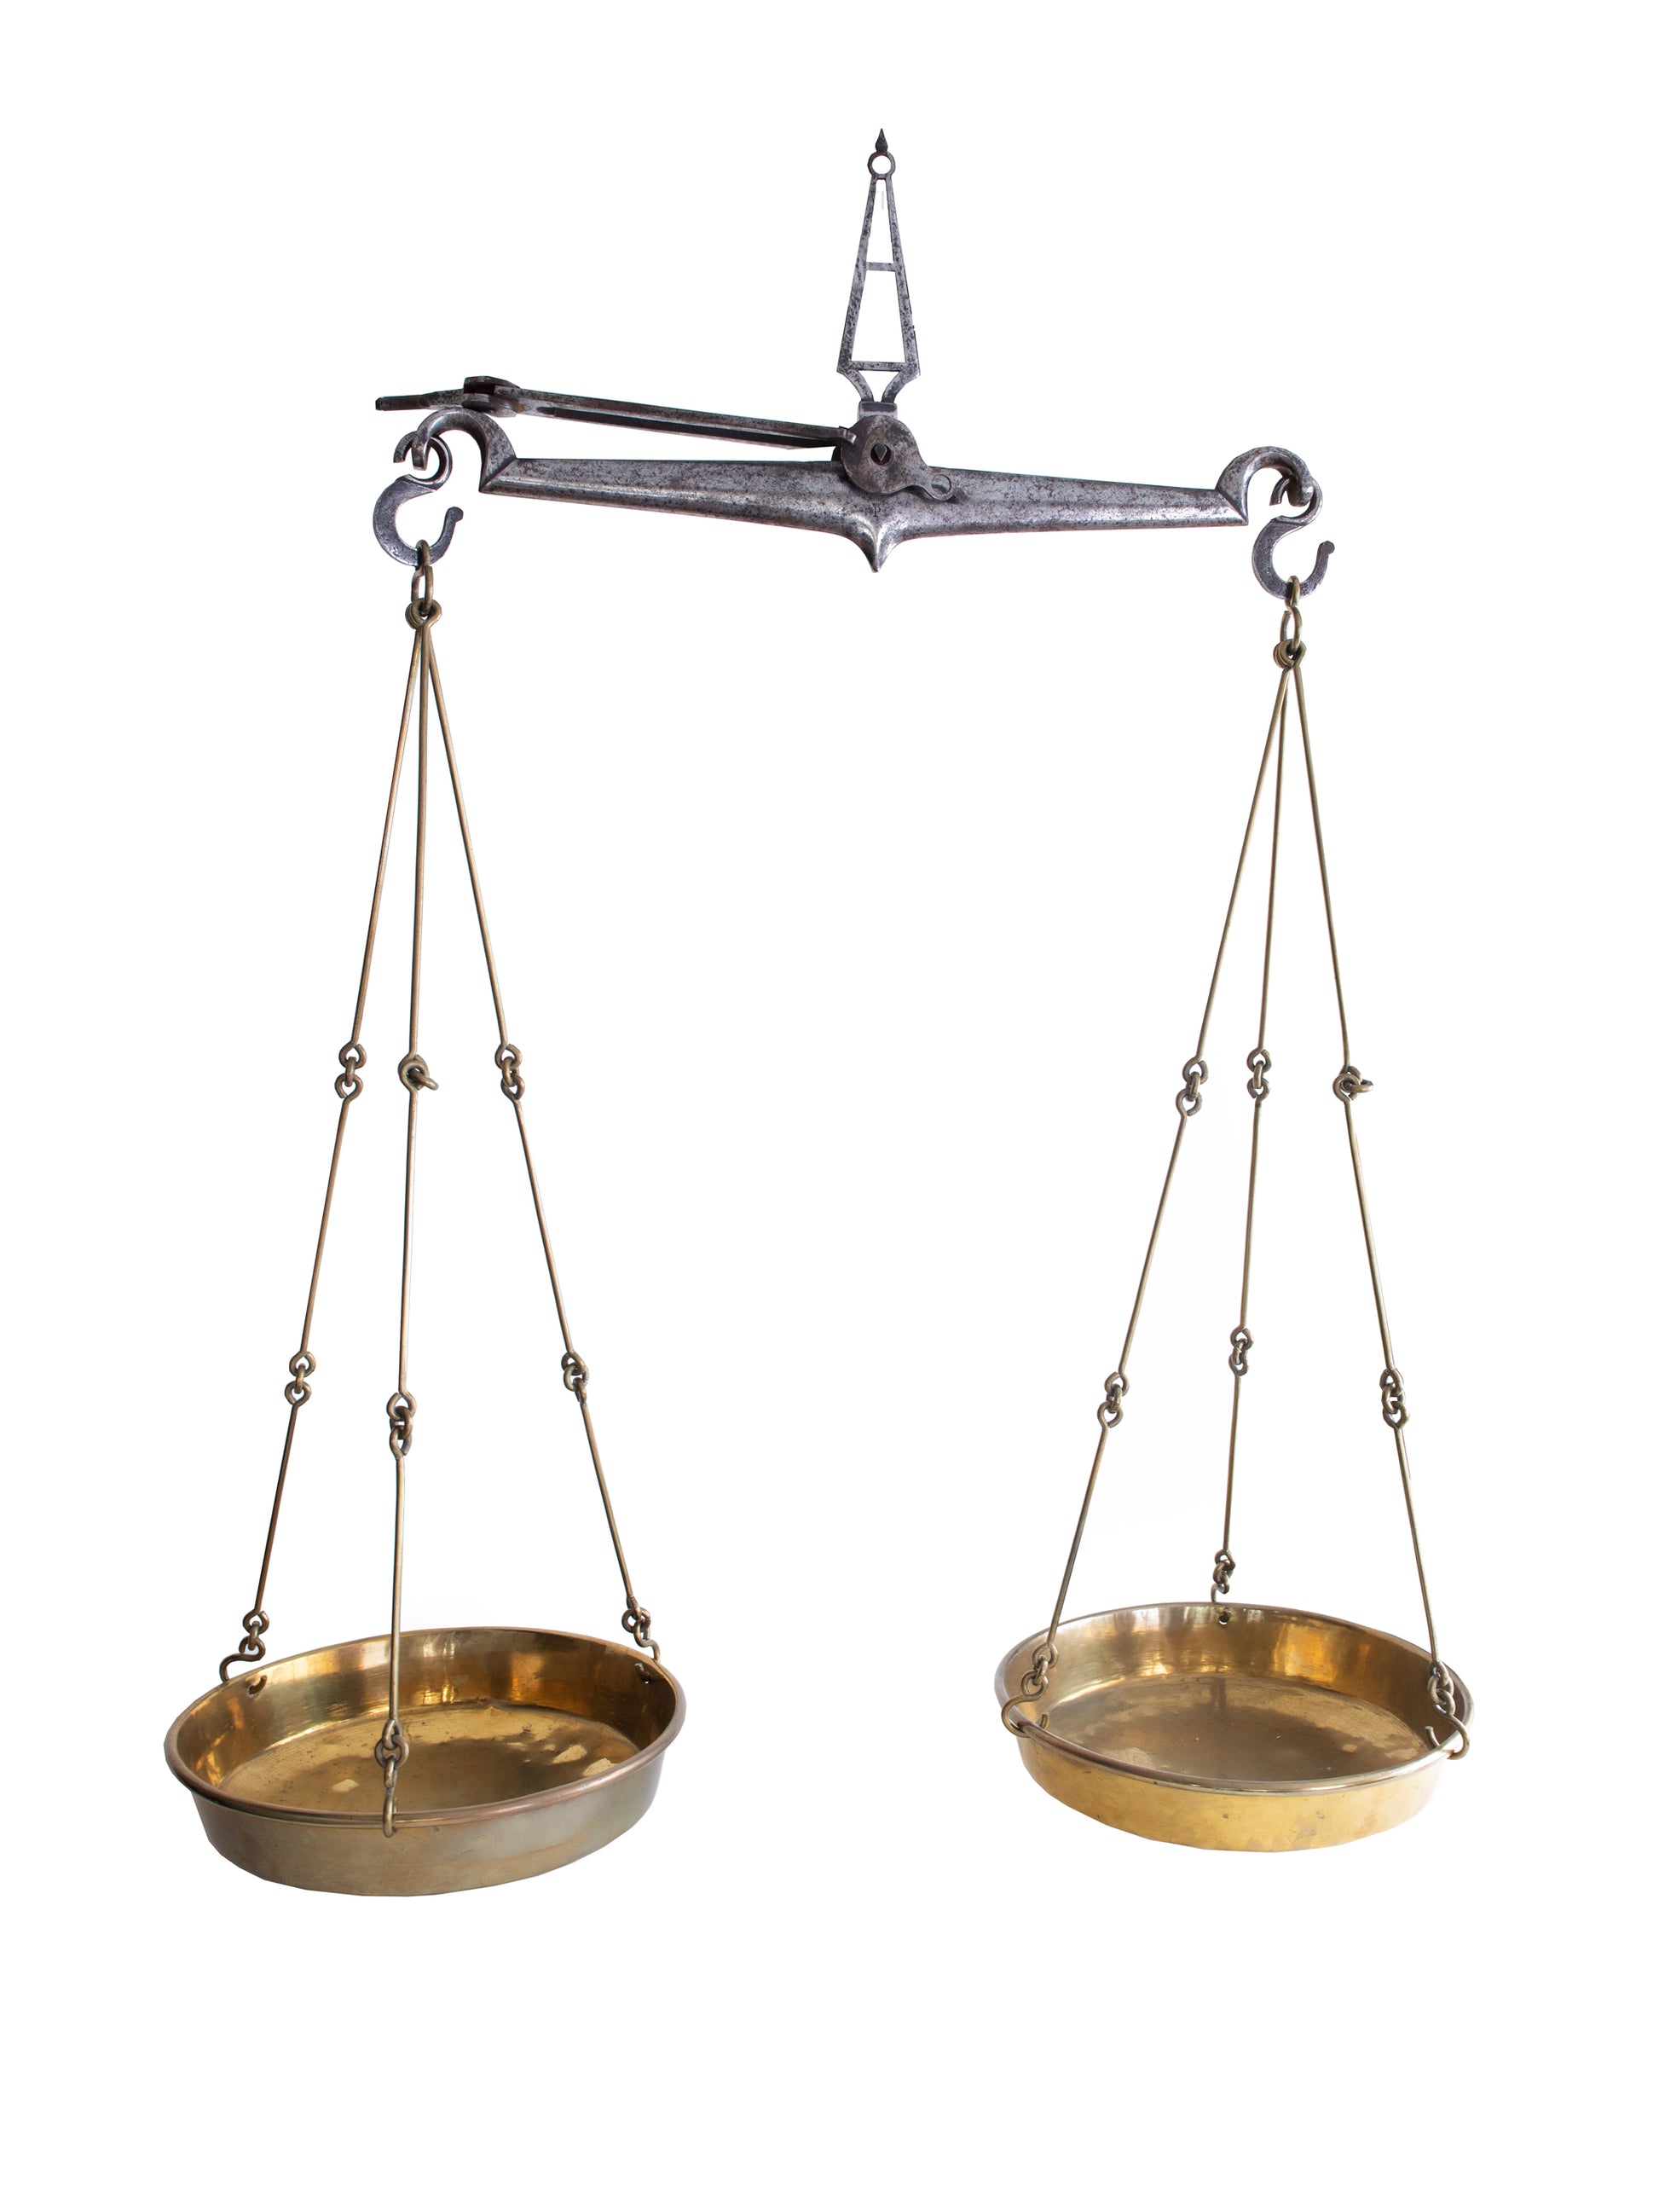 https://westontable.com/cdn/shop/products/1920s-French-Hanging-Balance-Scales-Weston-Table-SP.jpg?v=1620225058&width=1946